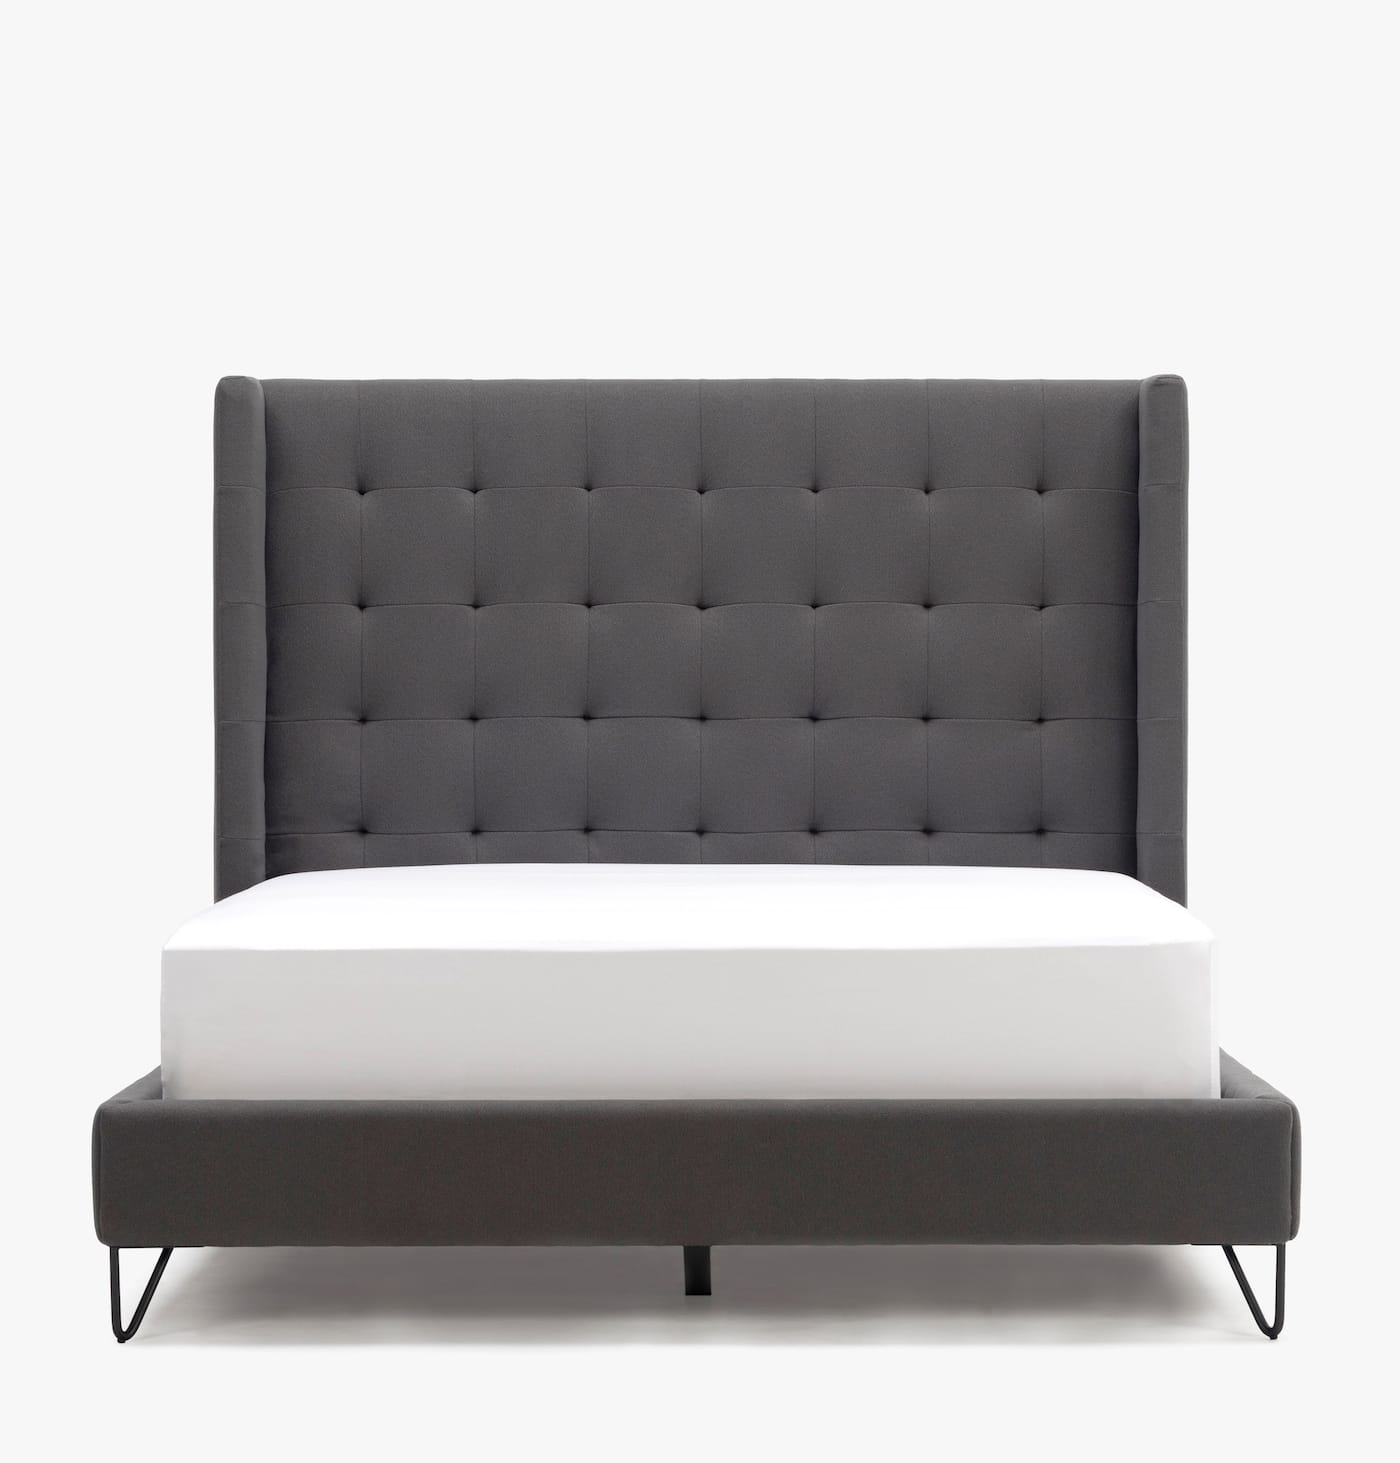 Venice bed charcoal